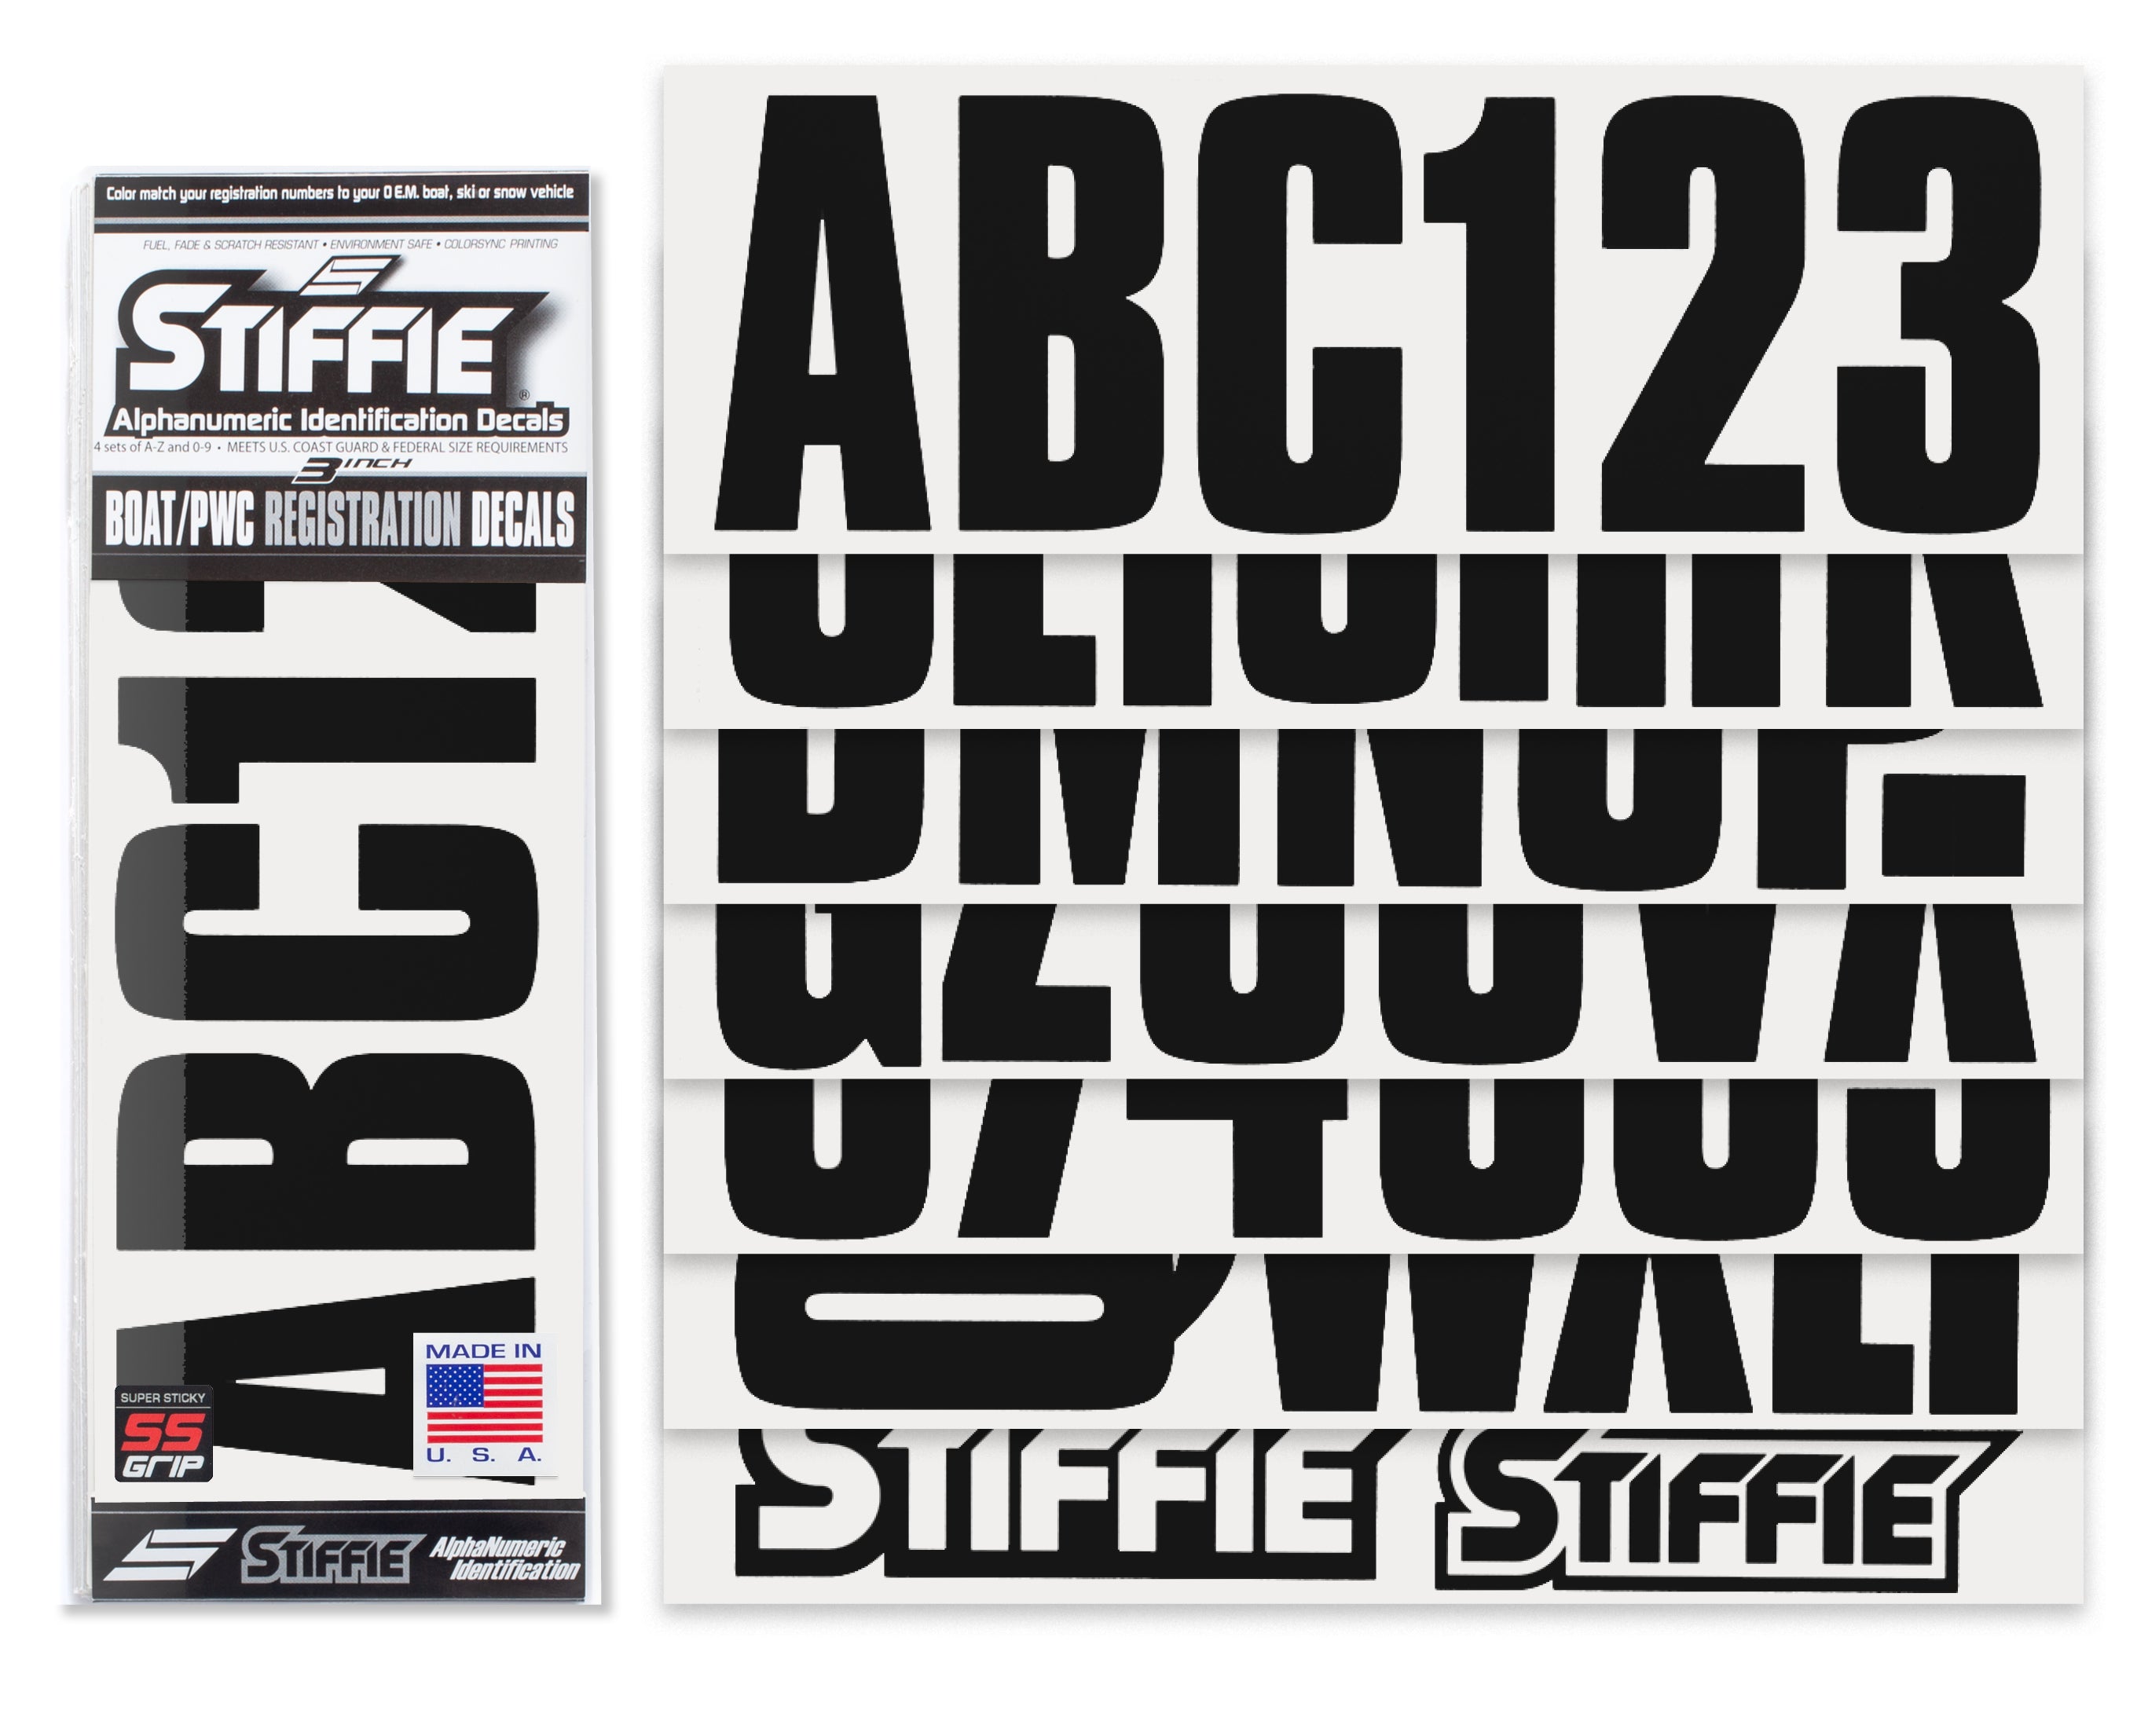 STIFFIE Uniline Black Super Sticky 3" Alpha Numeric Registration Identification Numbers Stickers Decals for Sea-Doo Spark, Inflatable Boats, Ribs, Hypalon/PVC, PWC and Boats